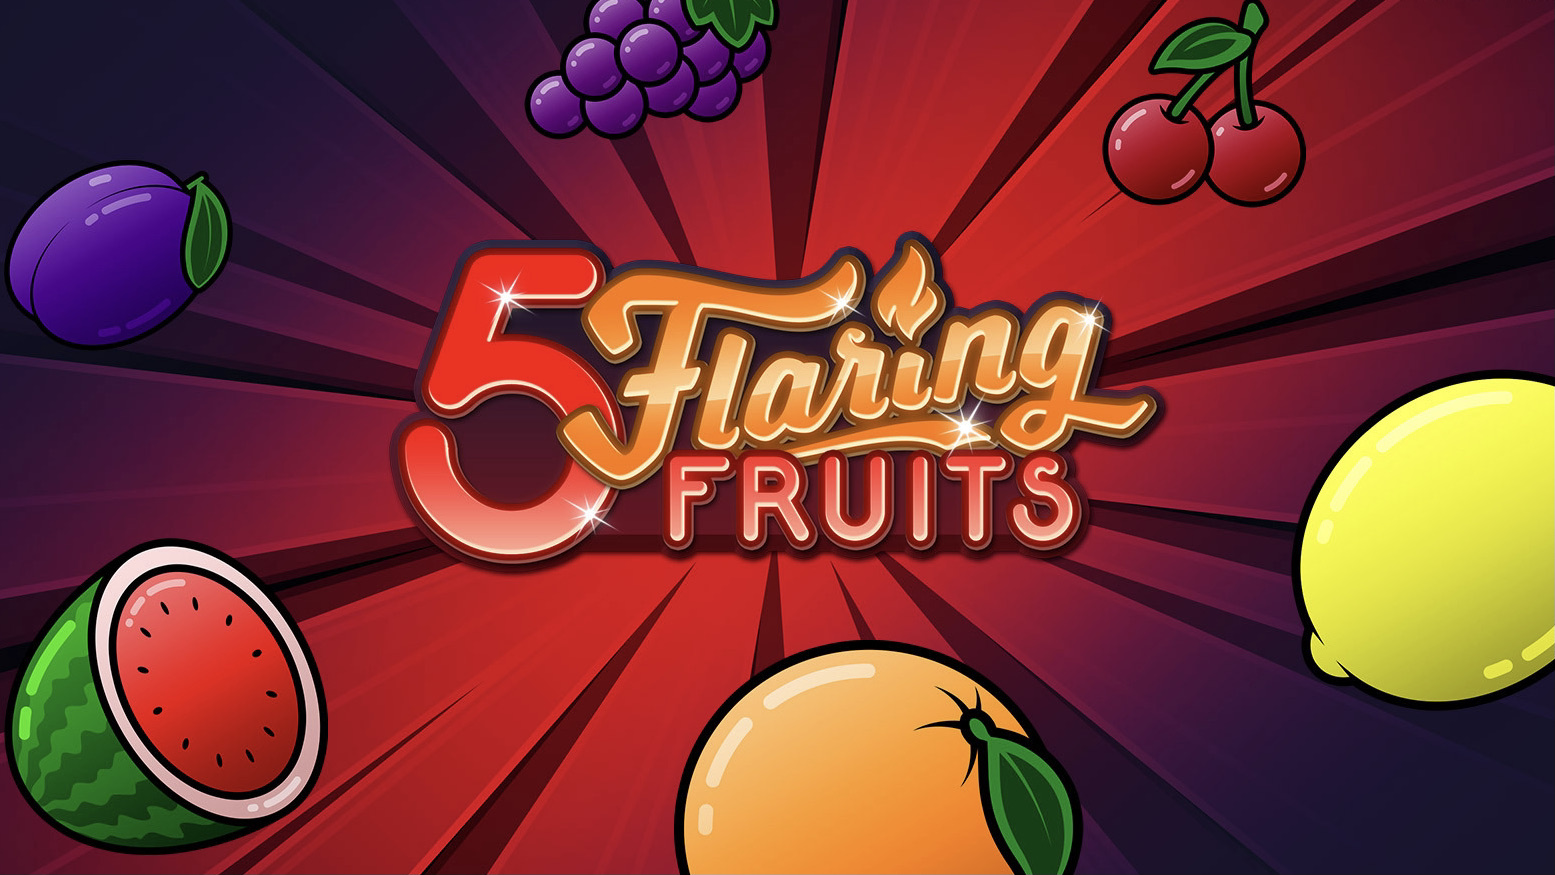 5 Flaring Fruits is a 5x3, five-payline video slot that will see a handful of sequel-titles in the coming months.